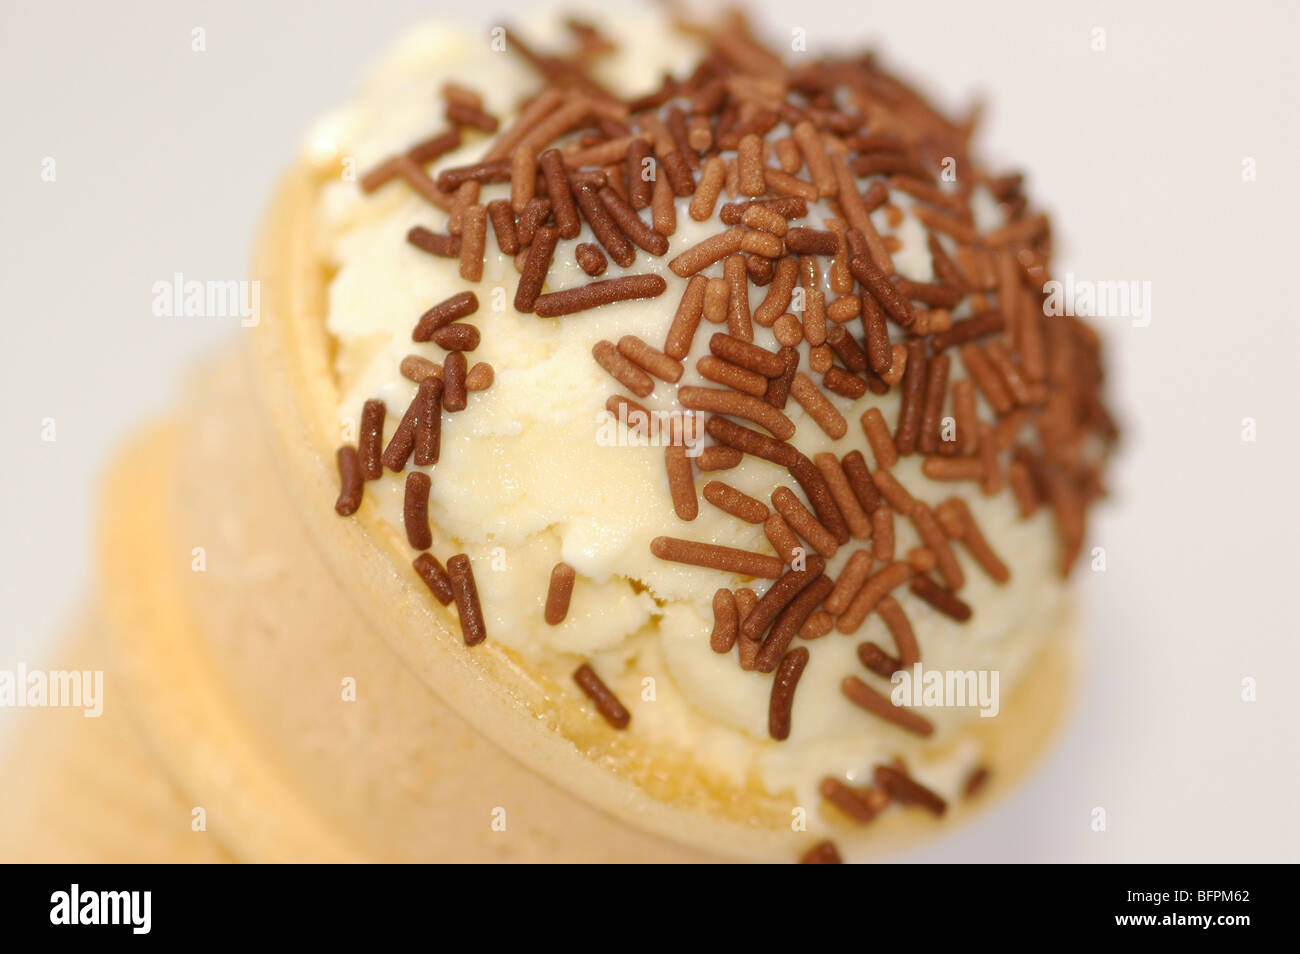 Close up of an ice cream with chocolate hundreds and thousands. Stock Photo